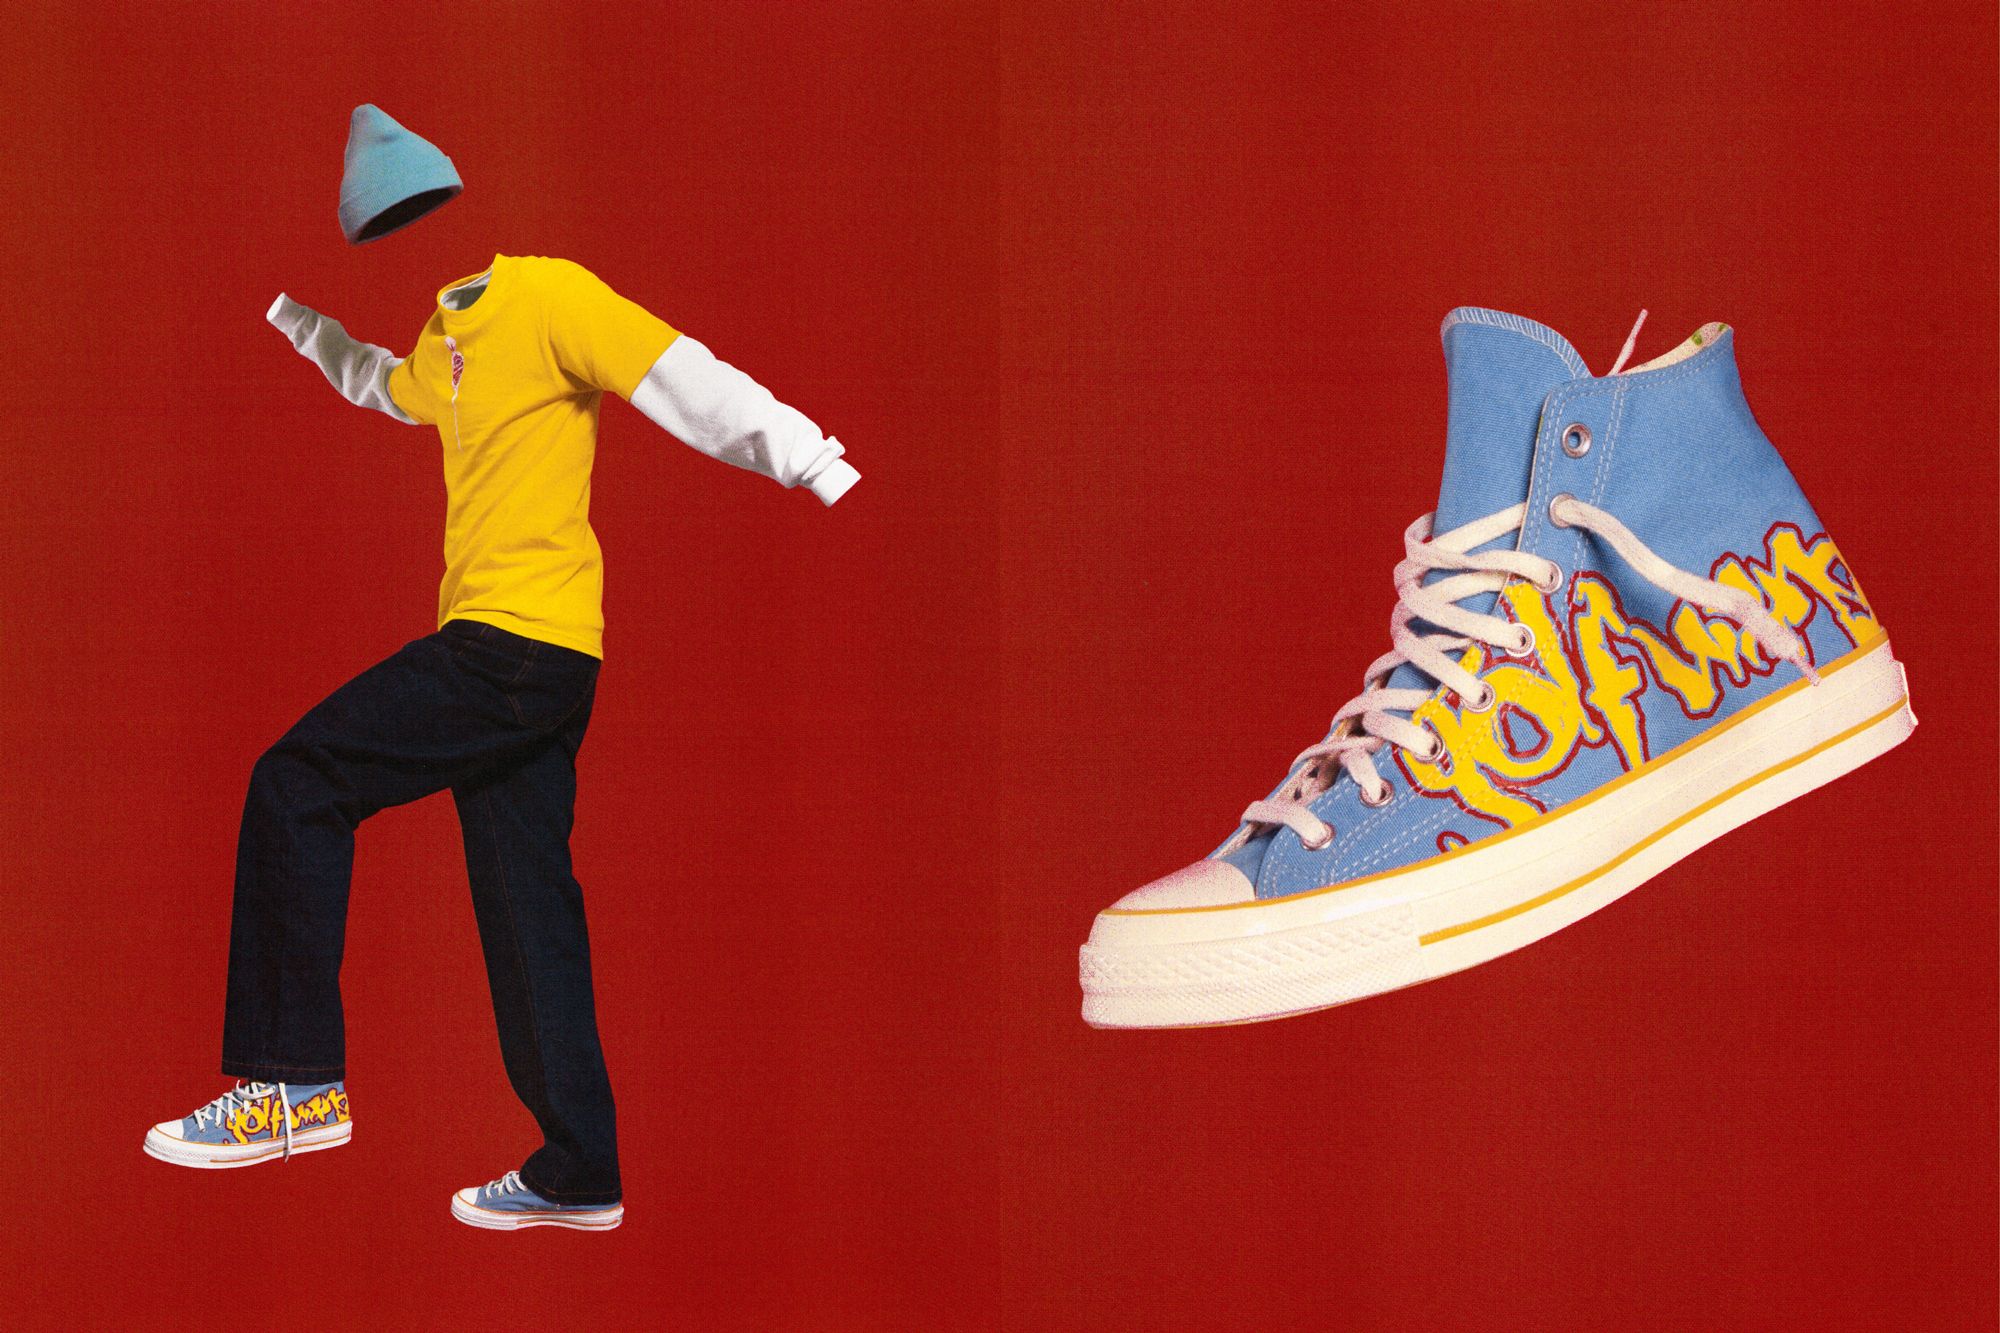 GOLF WANG and Converse By You Offer Up Customisable Chuck 70s - SadtuShops